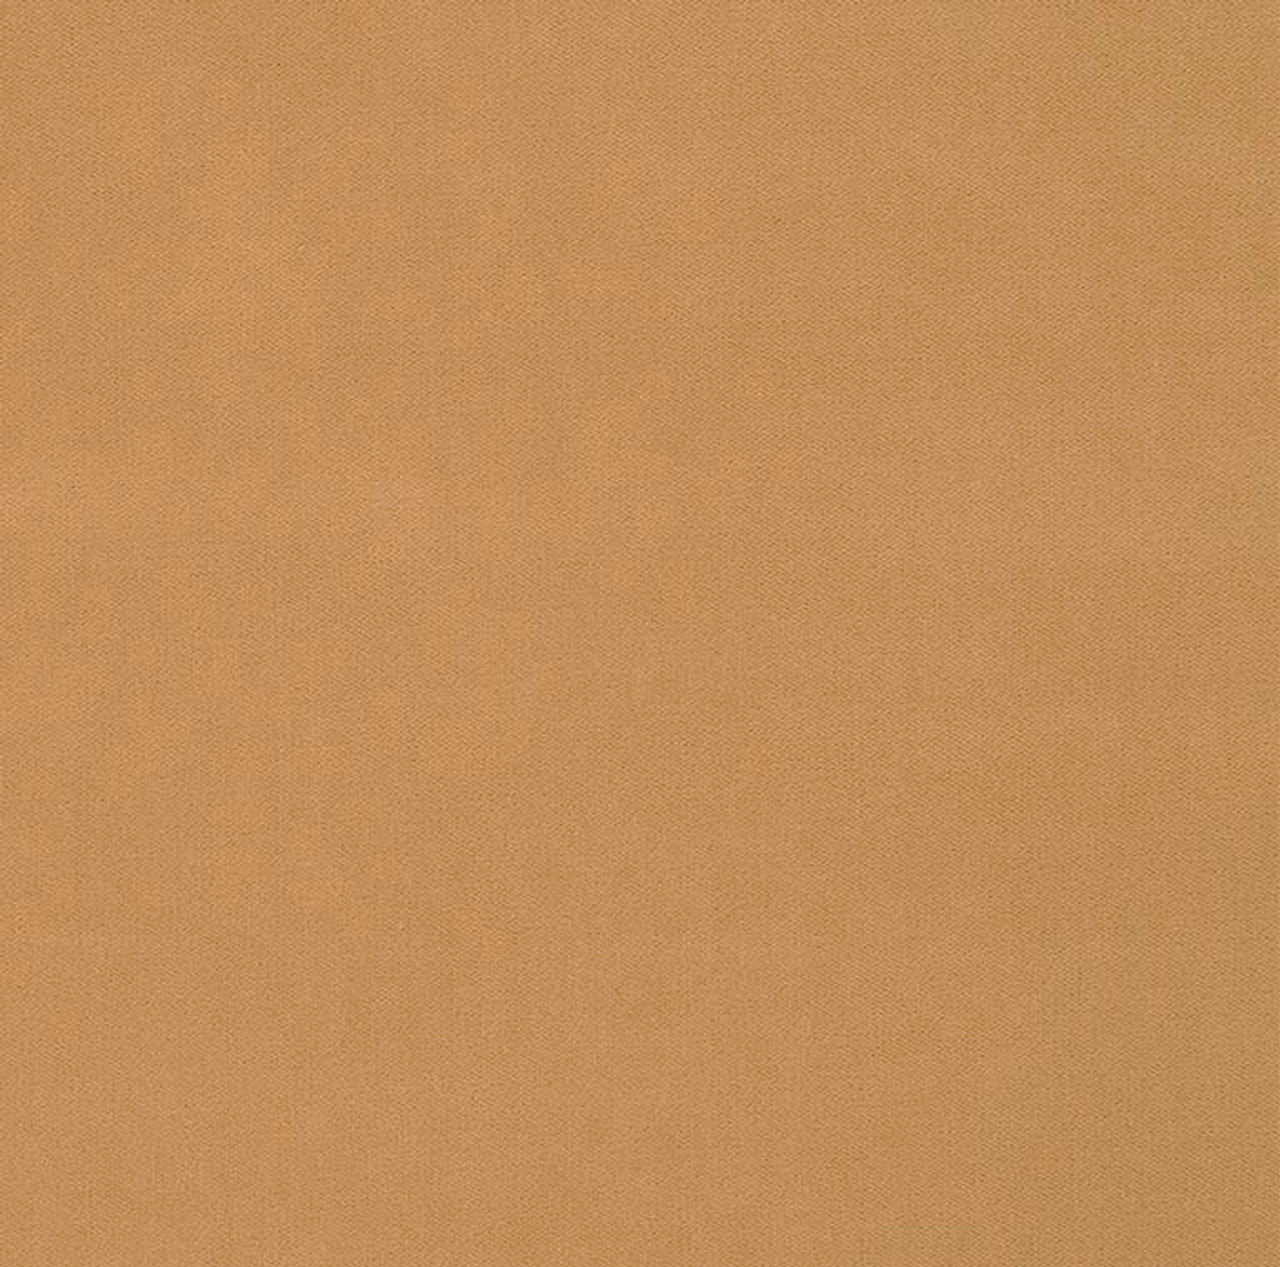 1.55 Yard Piece of Faux Suede Fabric, Light Tan, Felt-Backed, Upholstery  / Bag Making